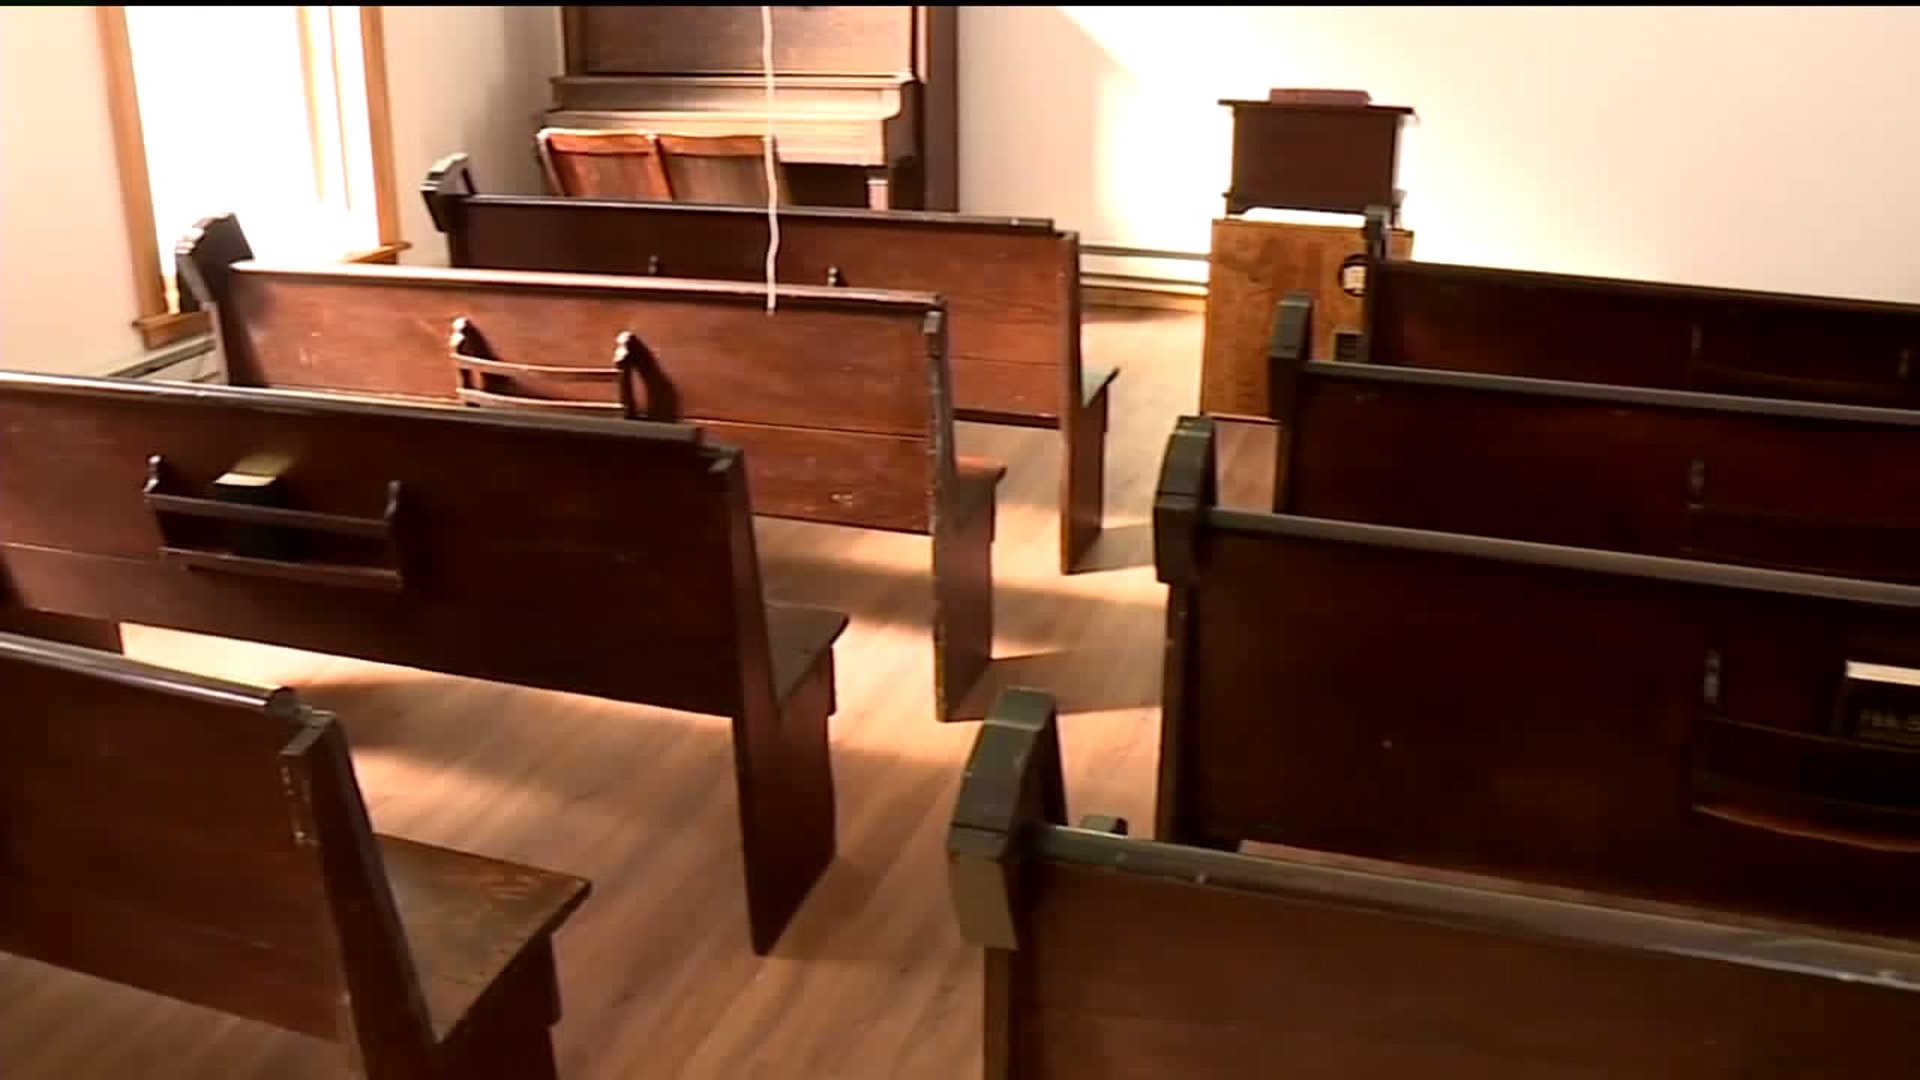 Group Hopes to Turn Old Church into Museum and Library